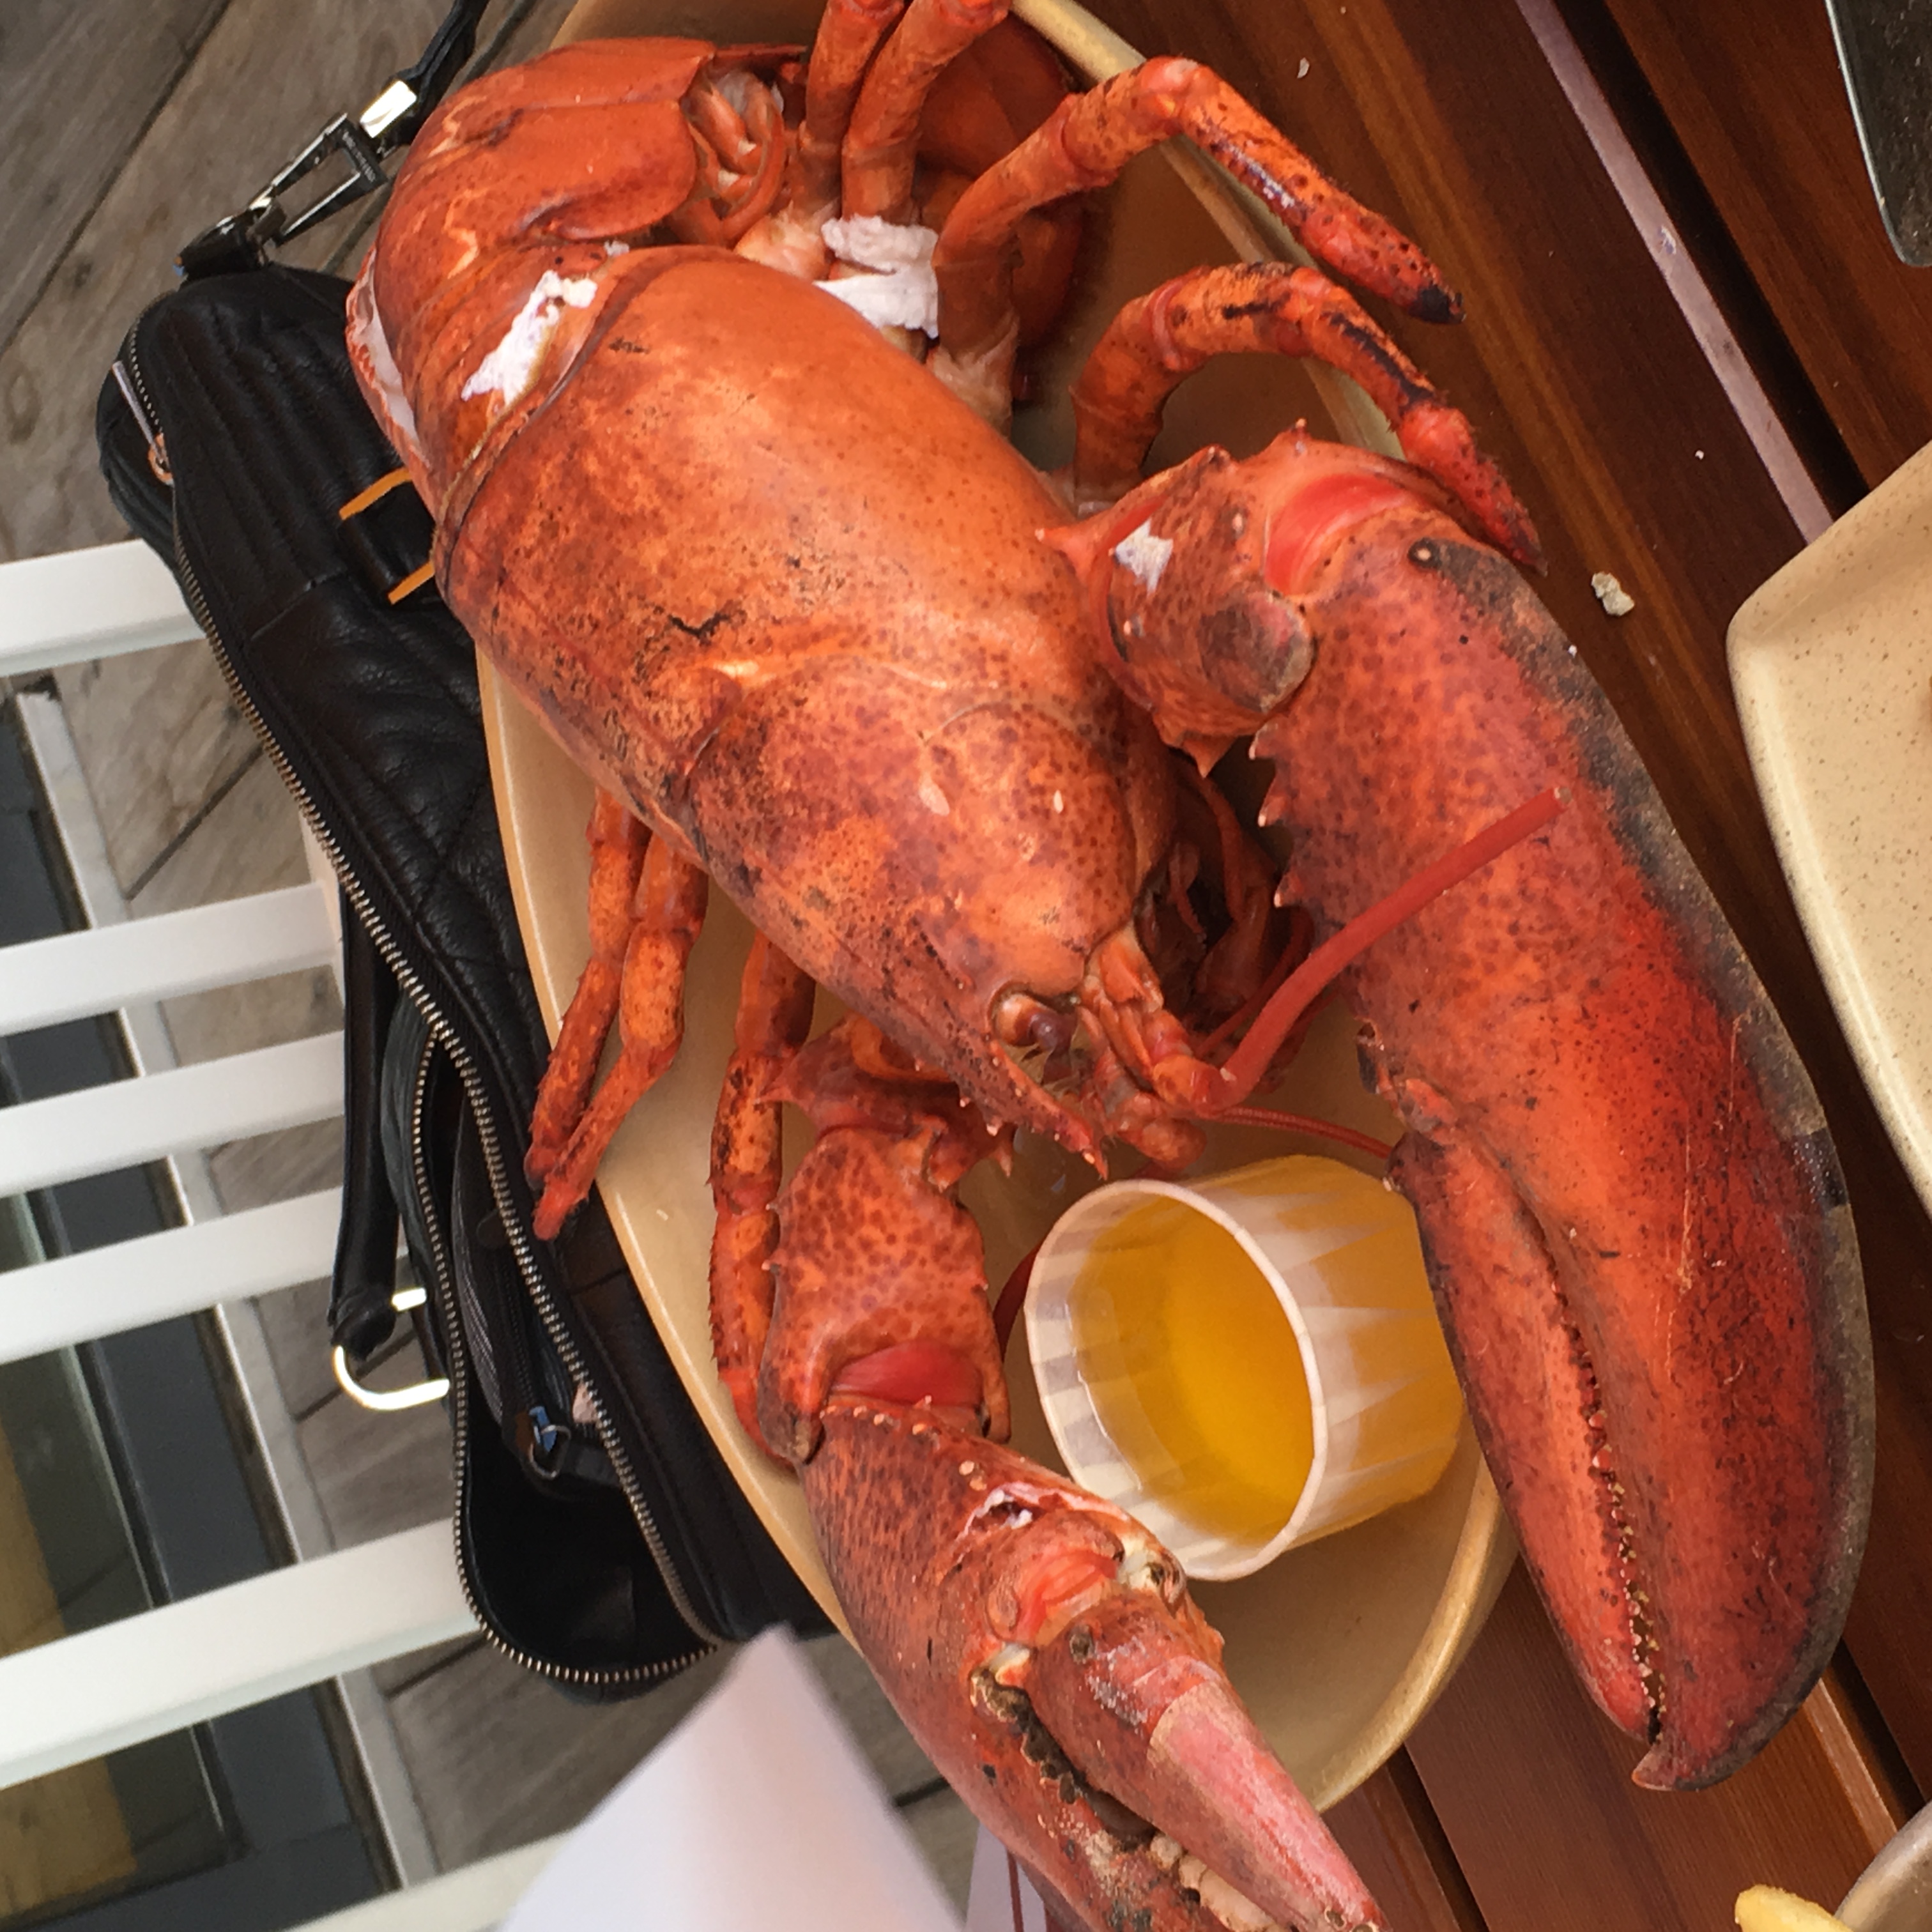 A Maine Lobster served in Boston.